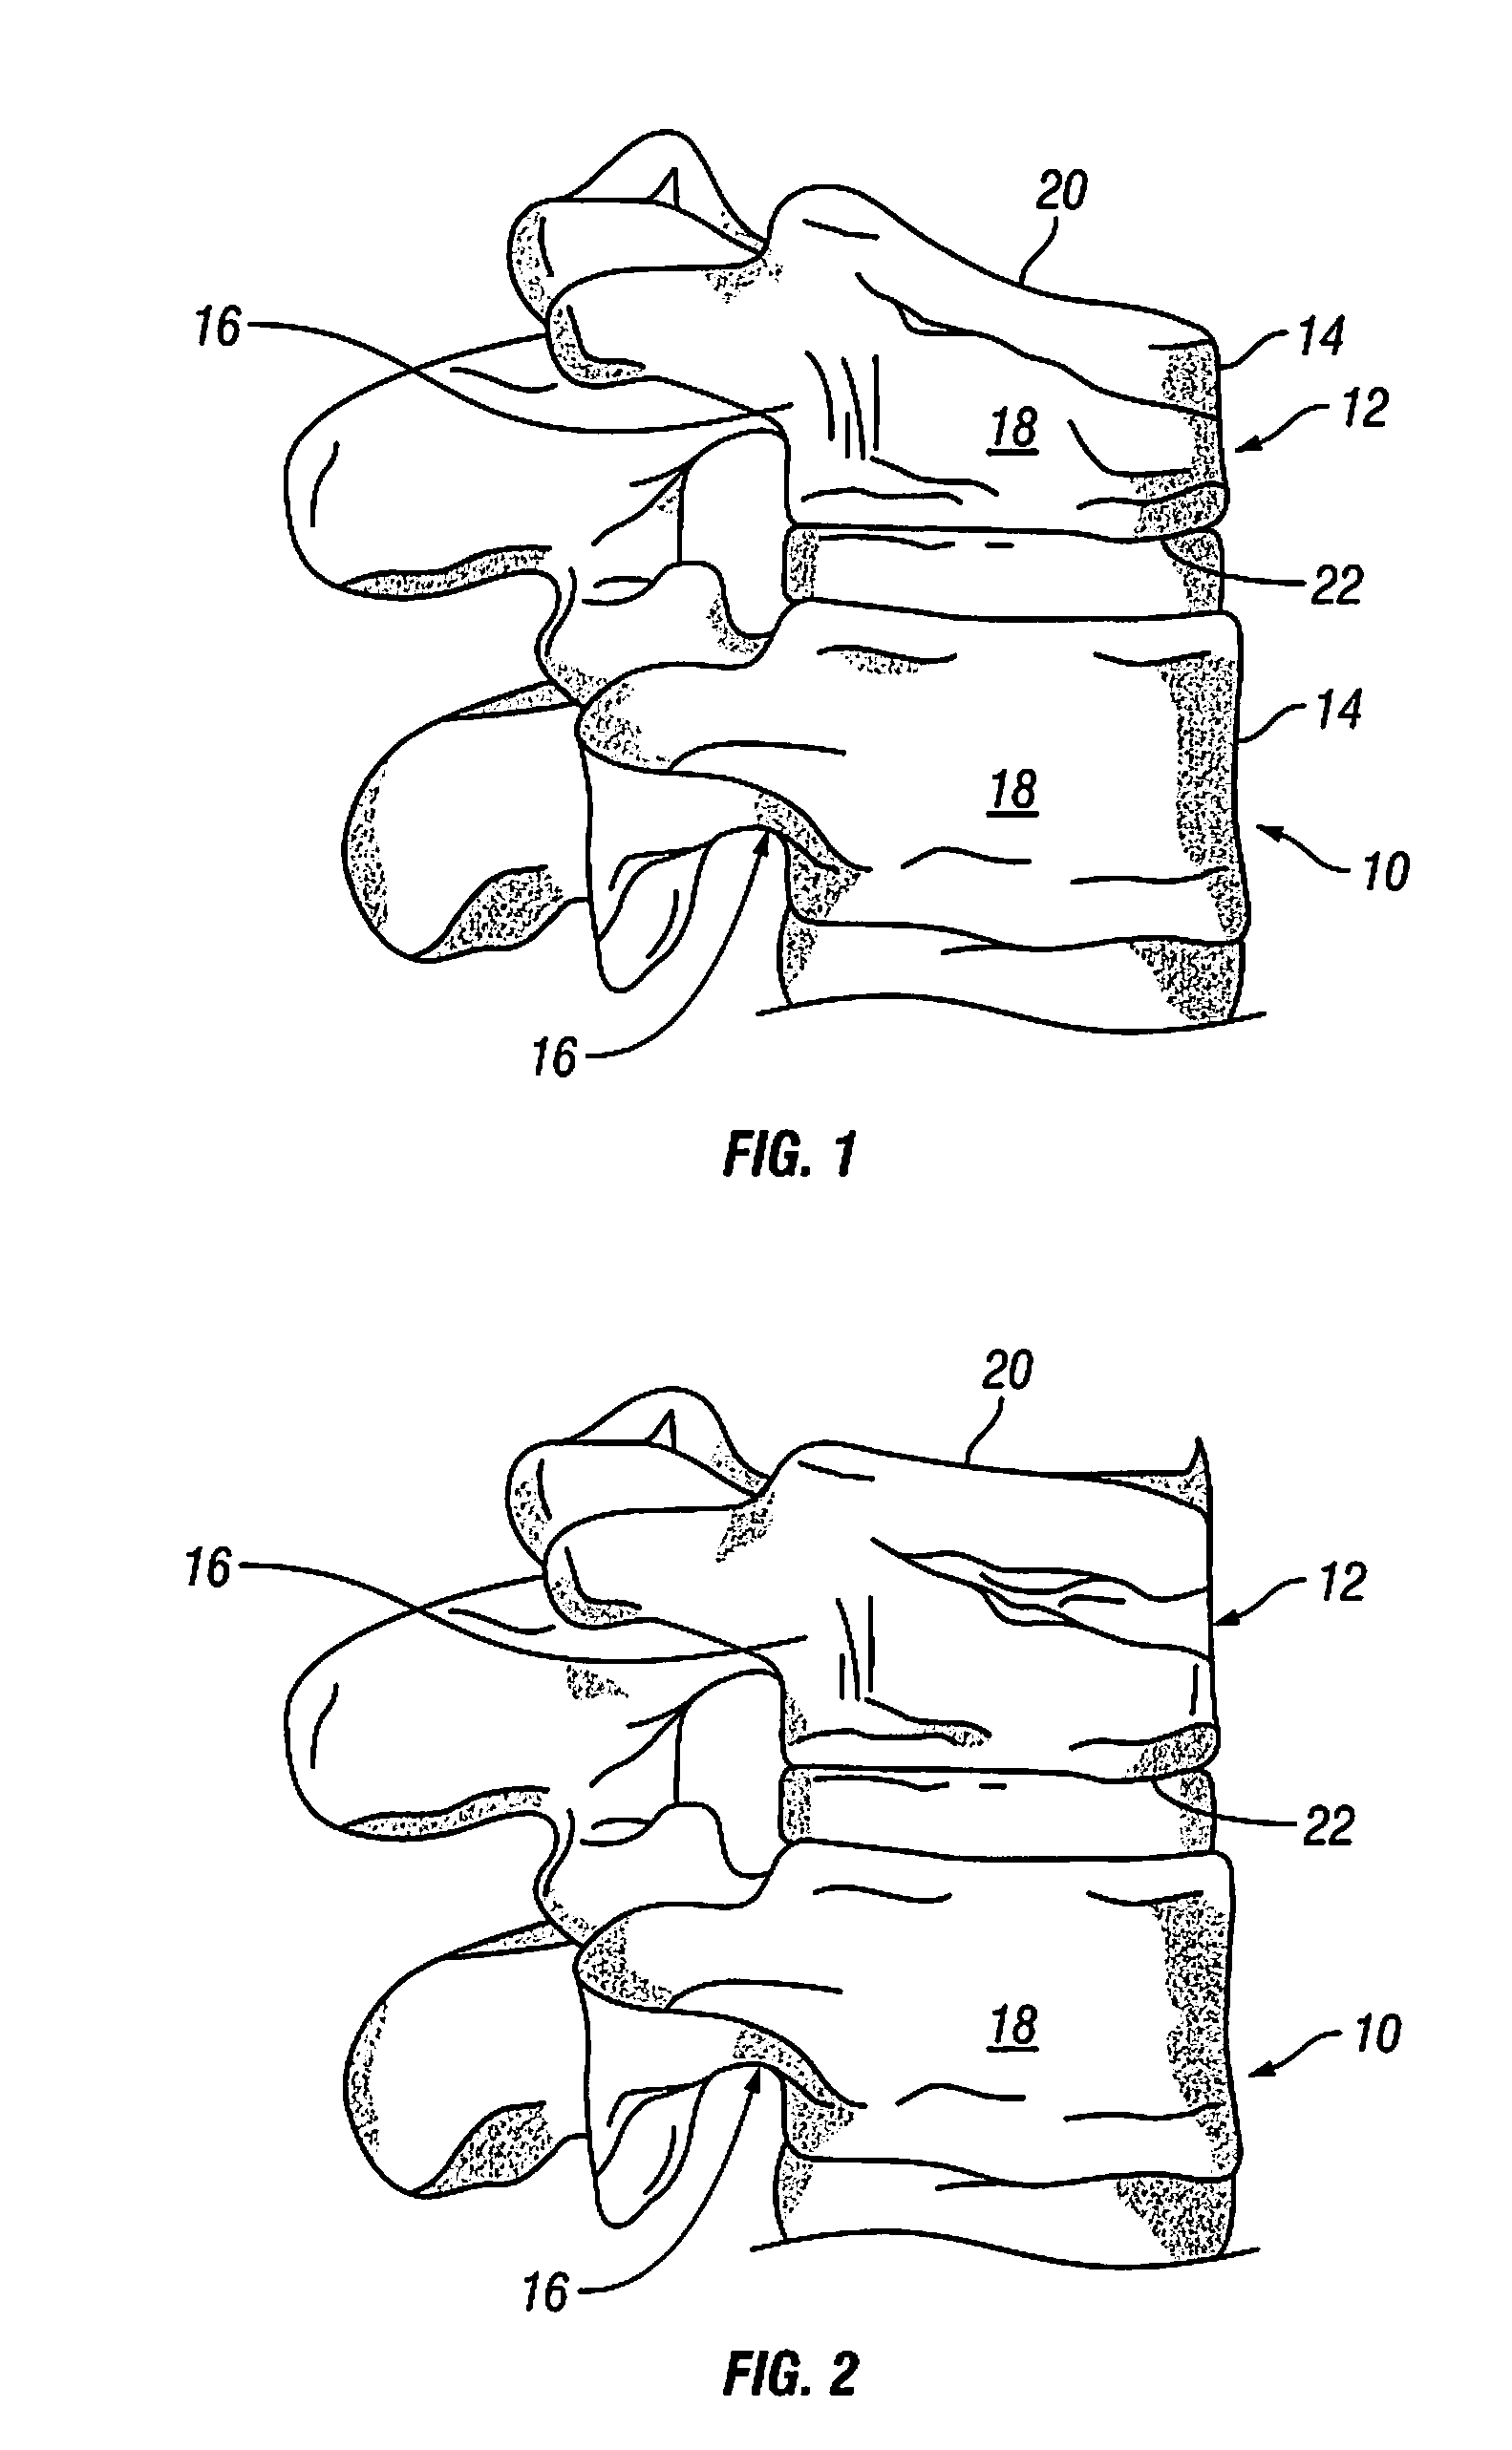 Devices and Methods for Treating Bone